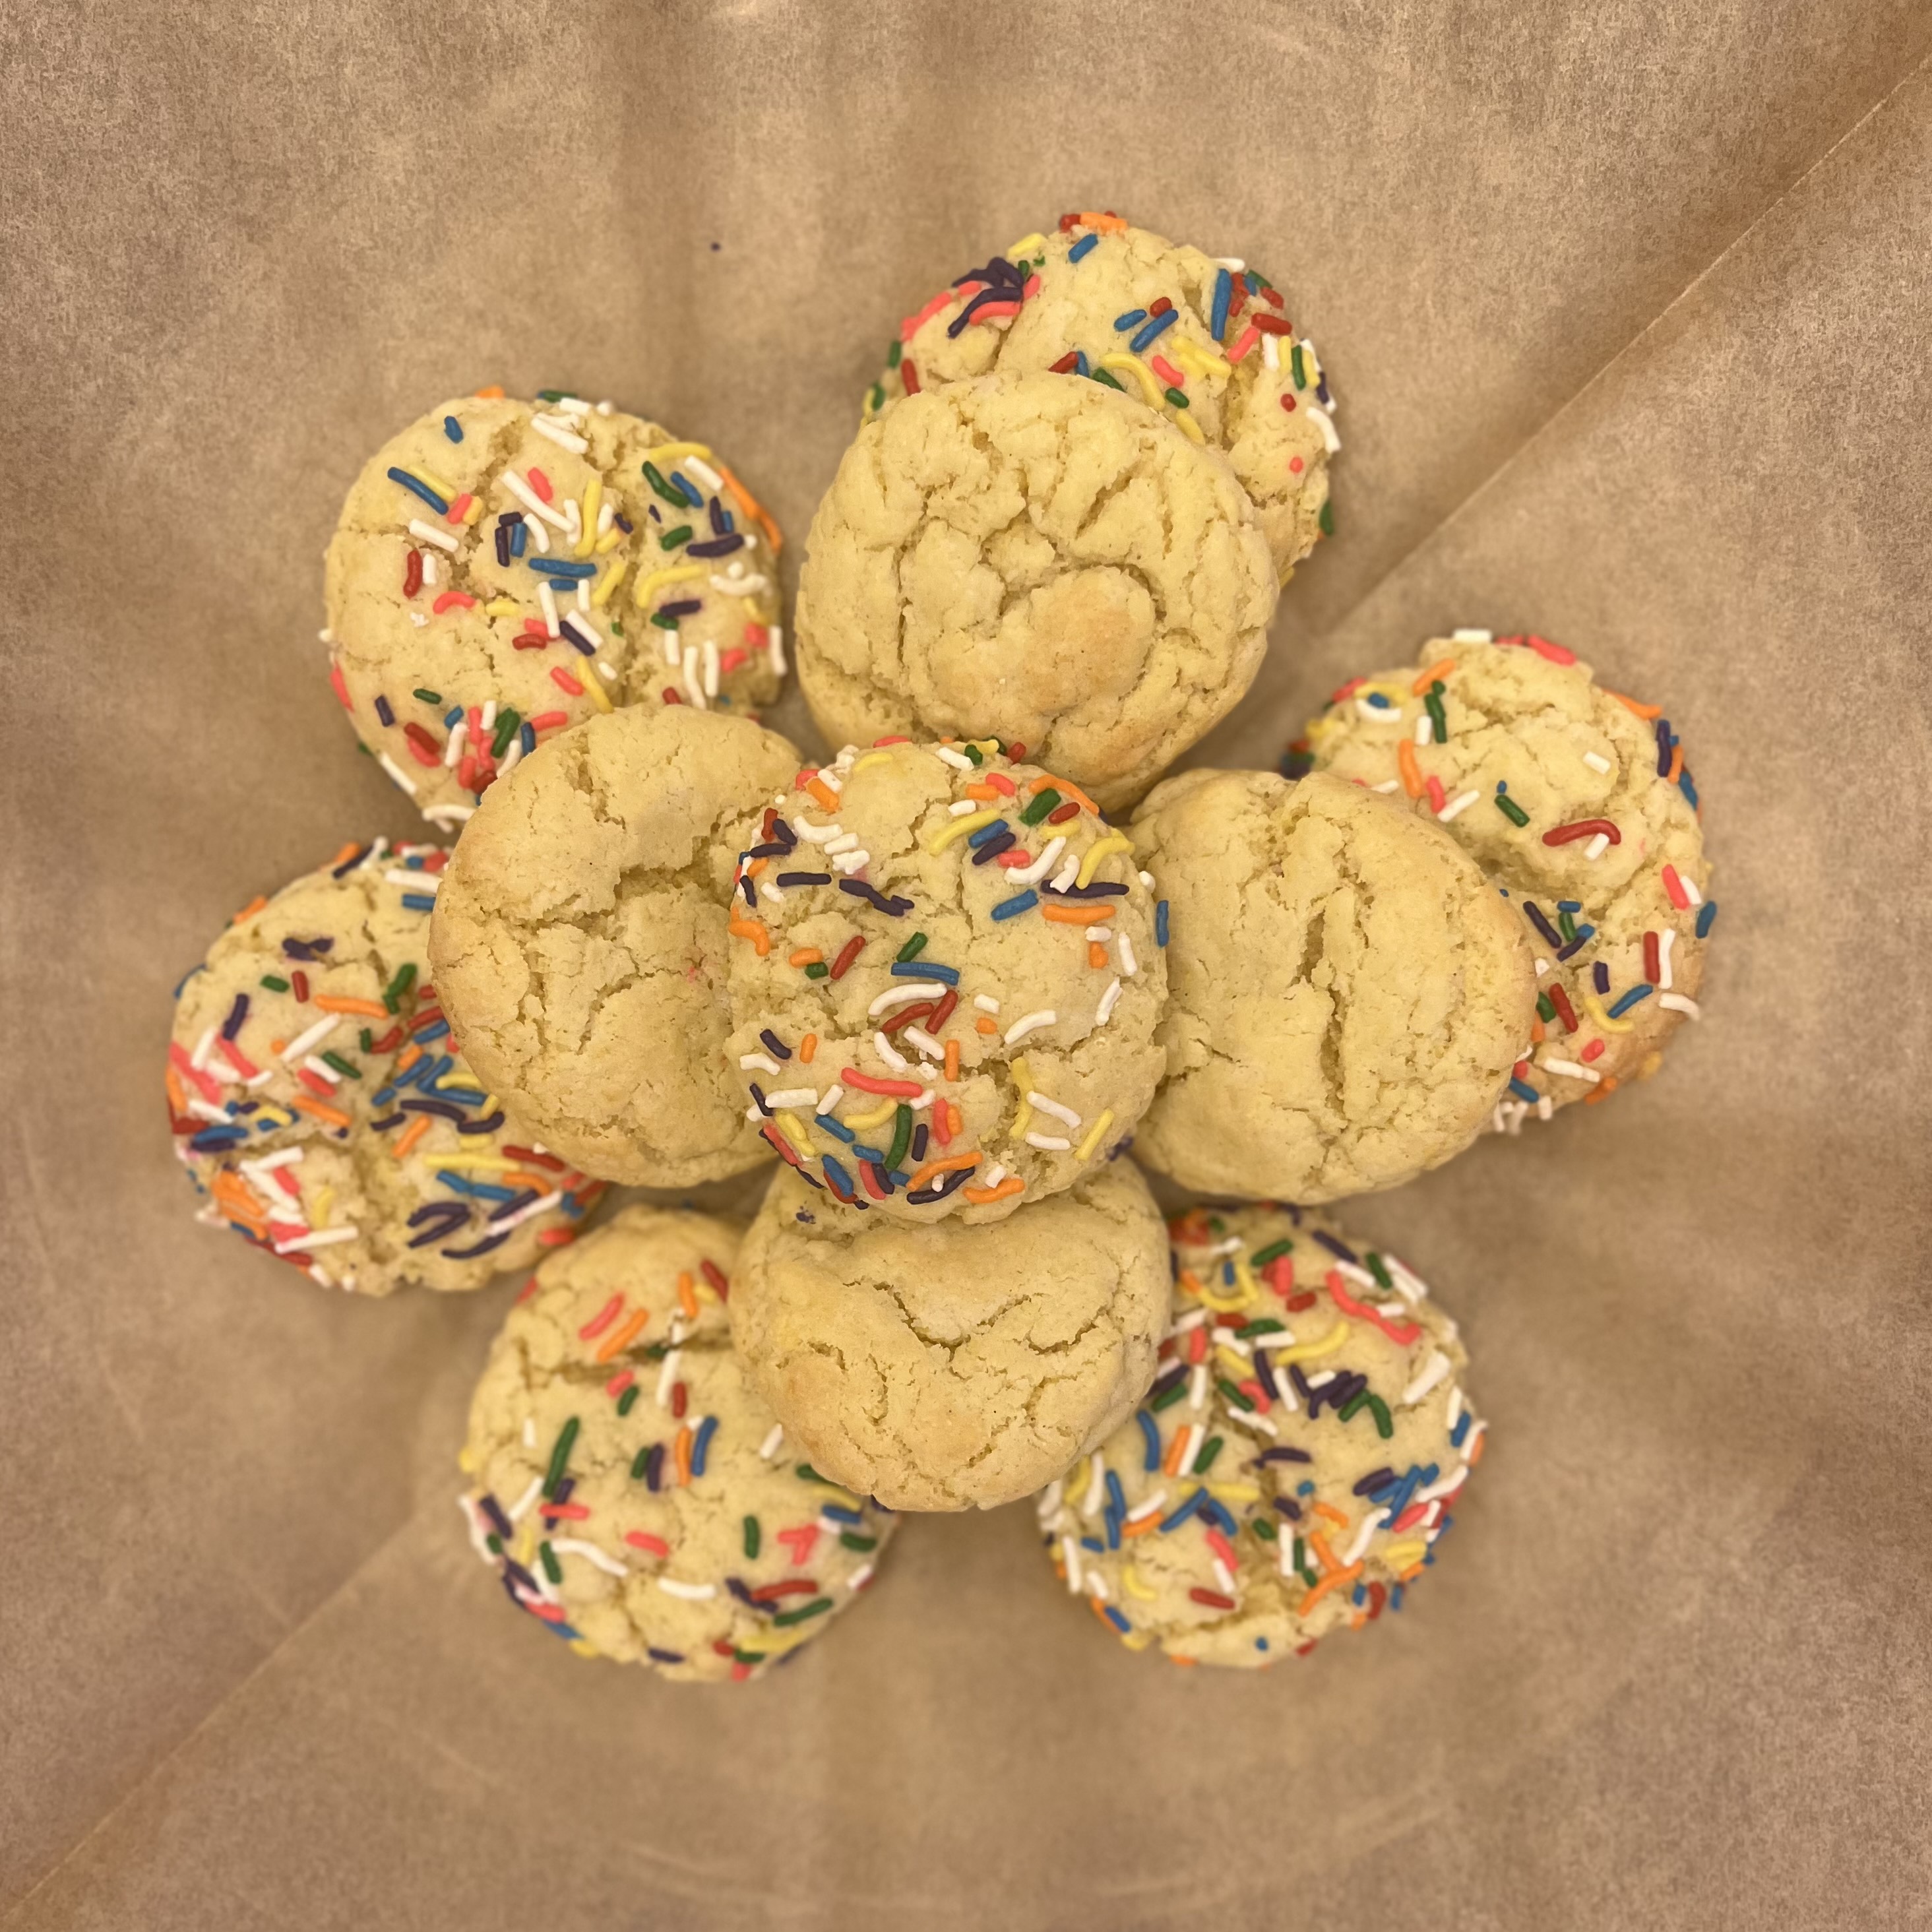 Baked cookies made from Honey Bunny Sprinkle Sugar Cookie Mix